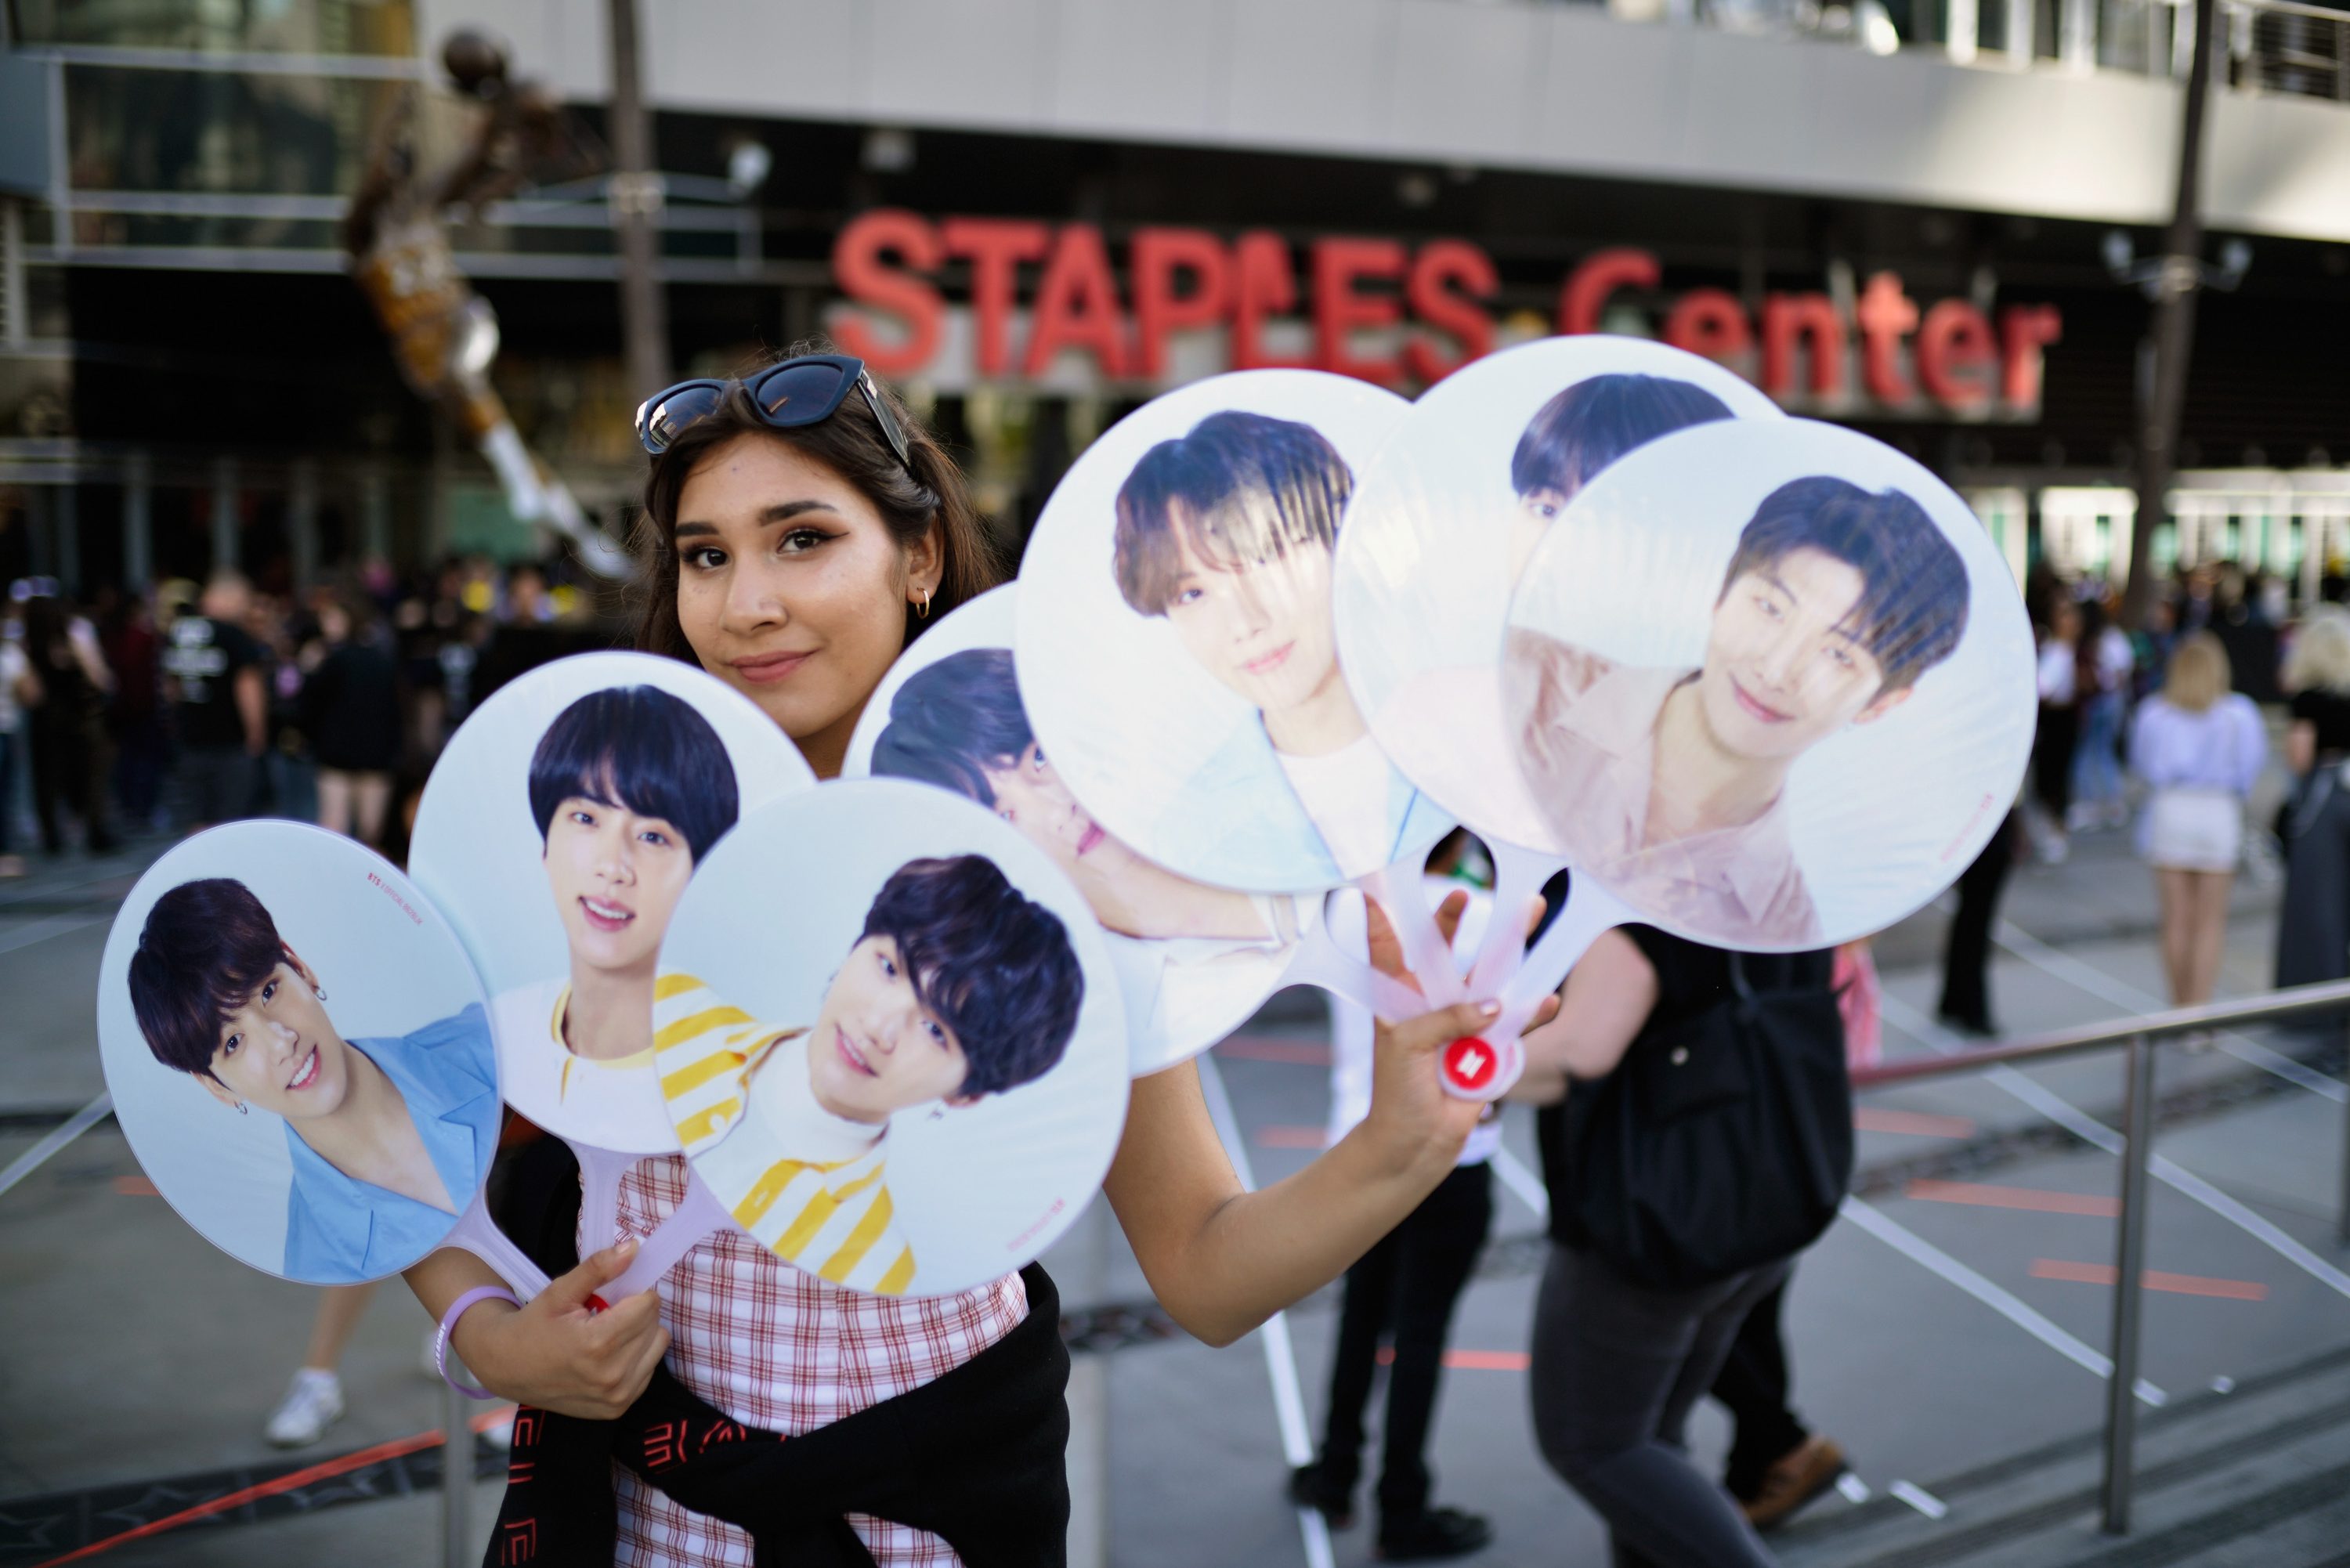 A fan awaits the BTS concert as part of the "Love Yourself" North American Tour at Staples Center on September 9, 2018 in Los Angeles, California.